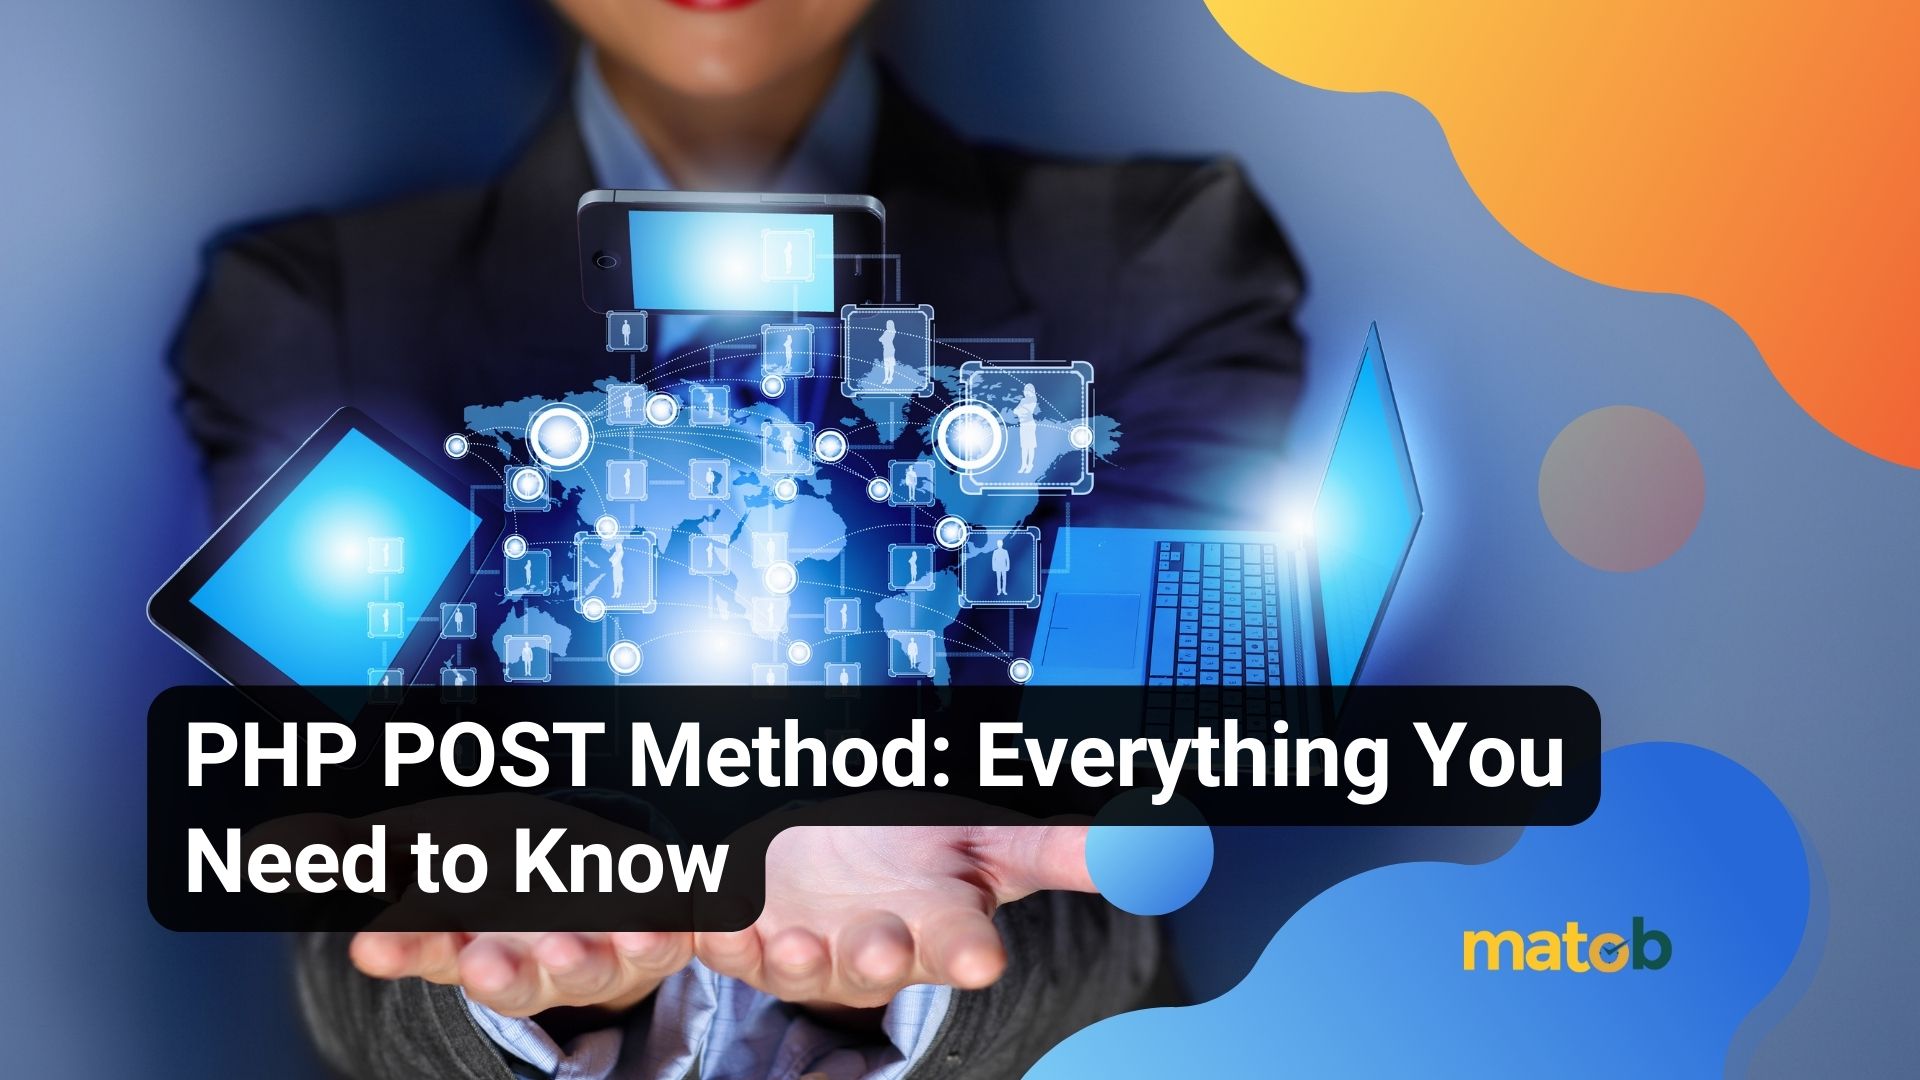 PHP POST Method: Everything You Need to Know